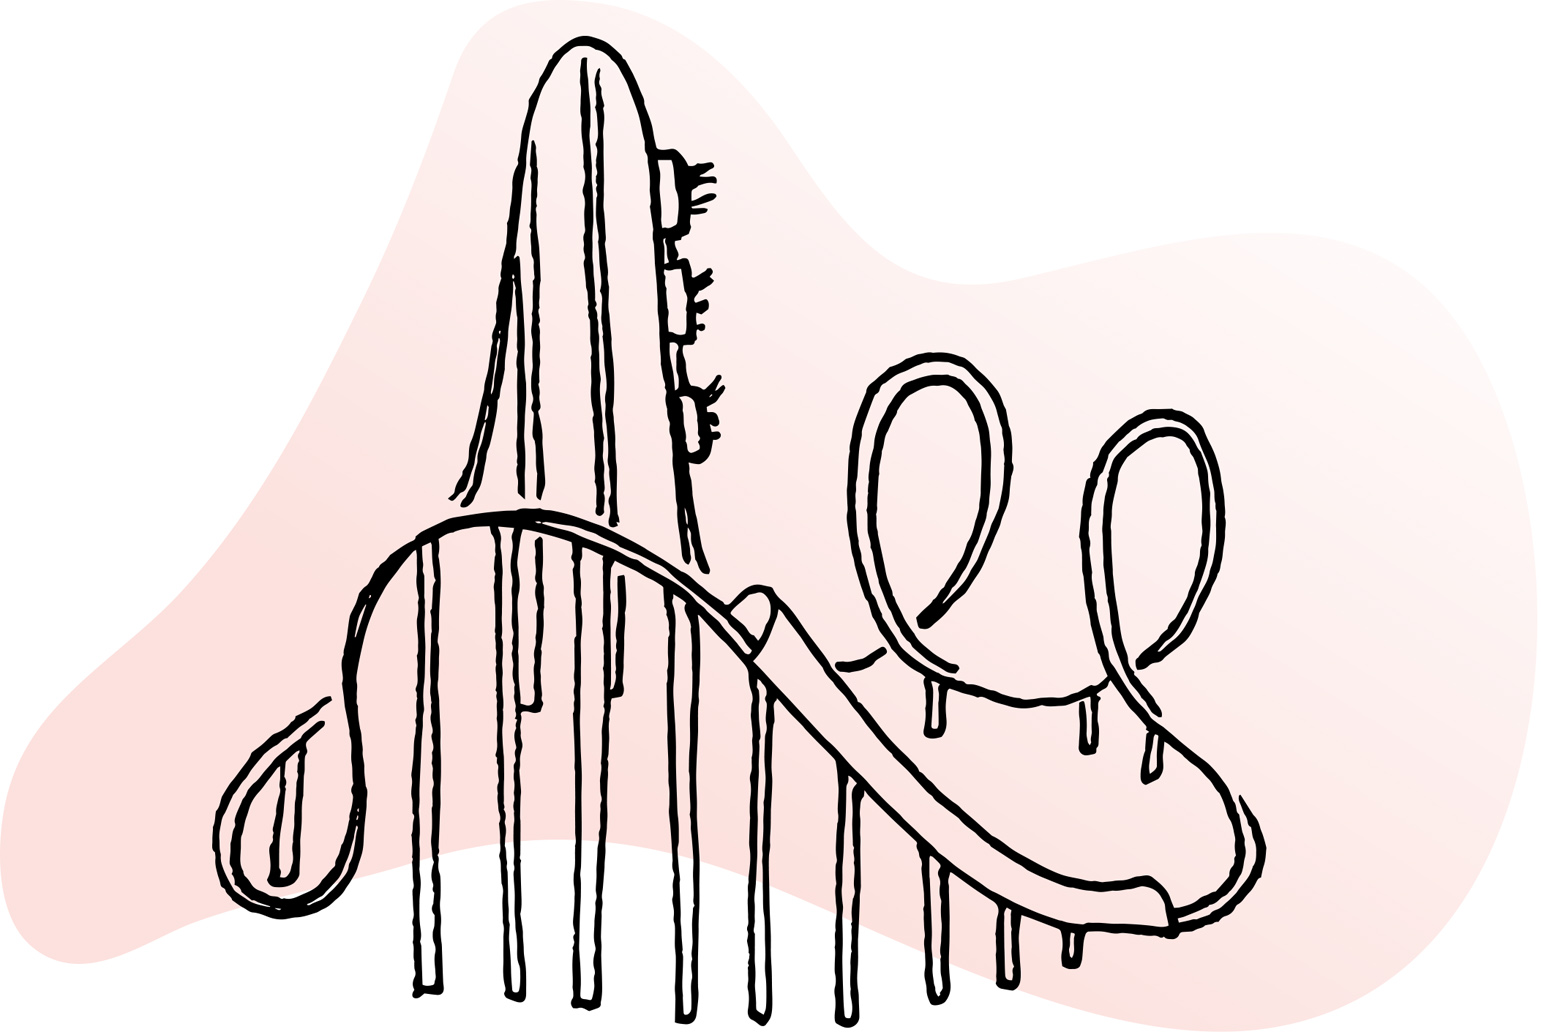 Line illustration of roller coaster, cars plunging down near-vertical track towards loop-de-loops, riders' arms raised high